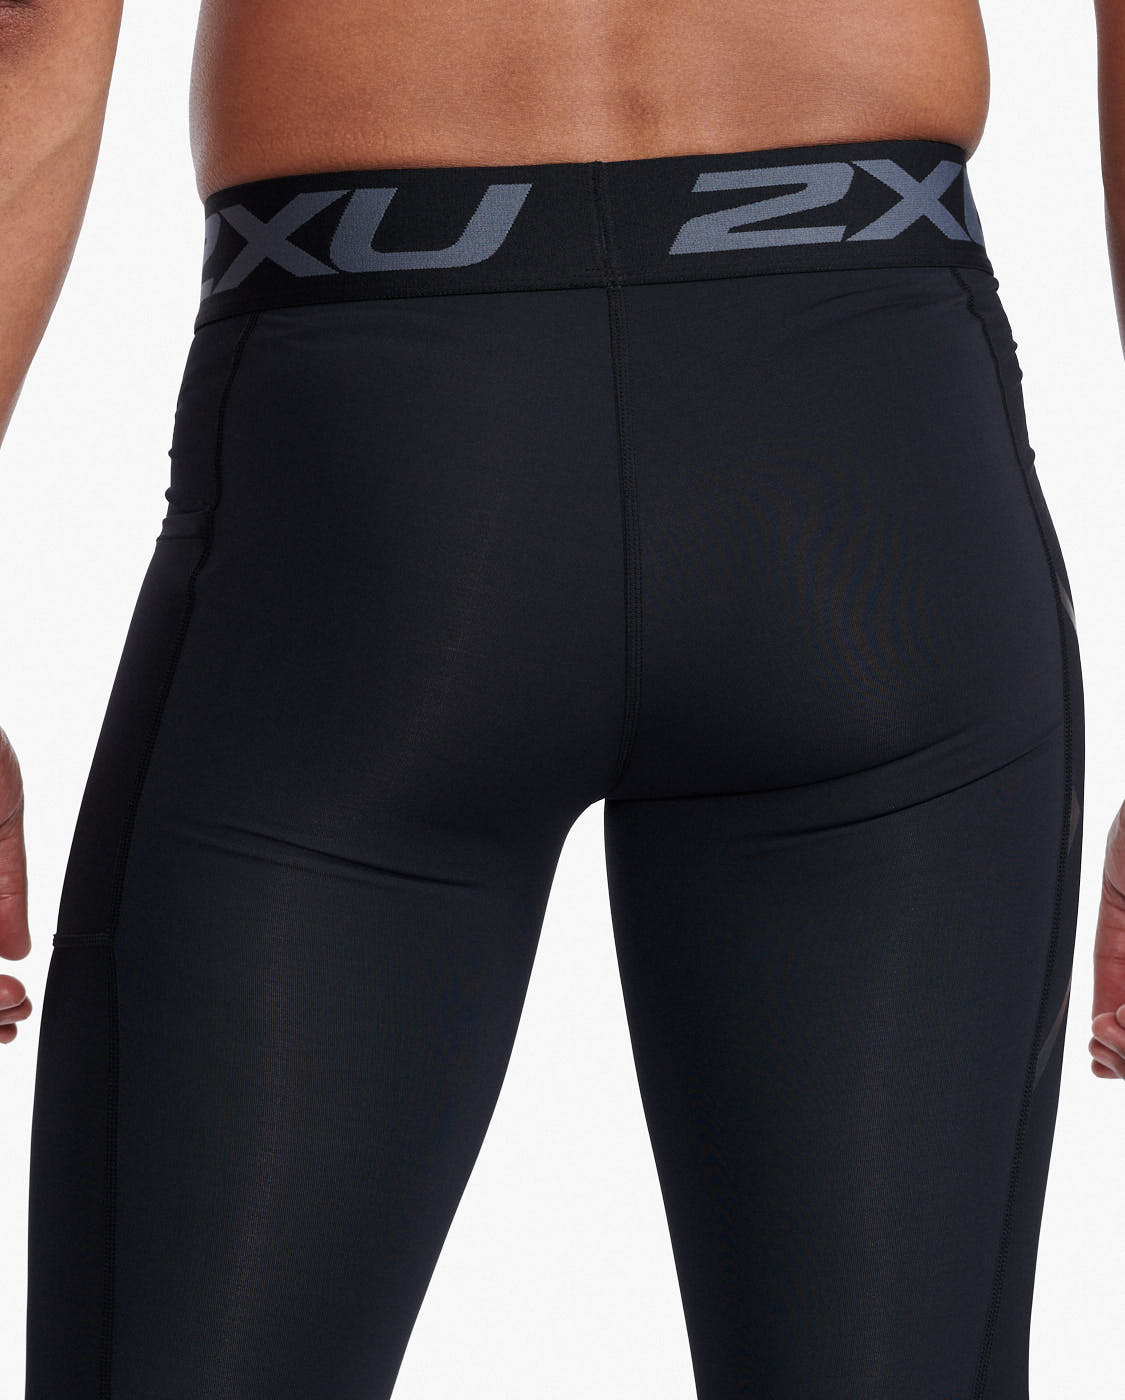 Motion Compression 3/4 Tights